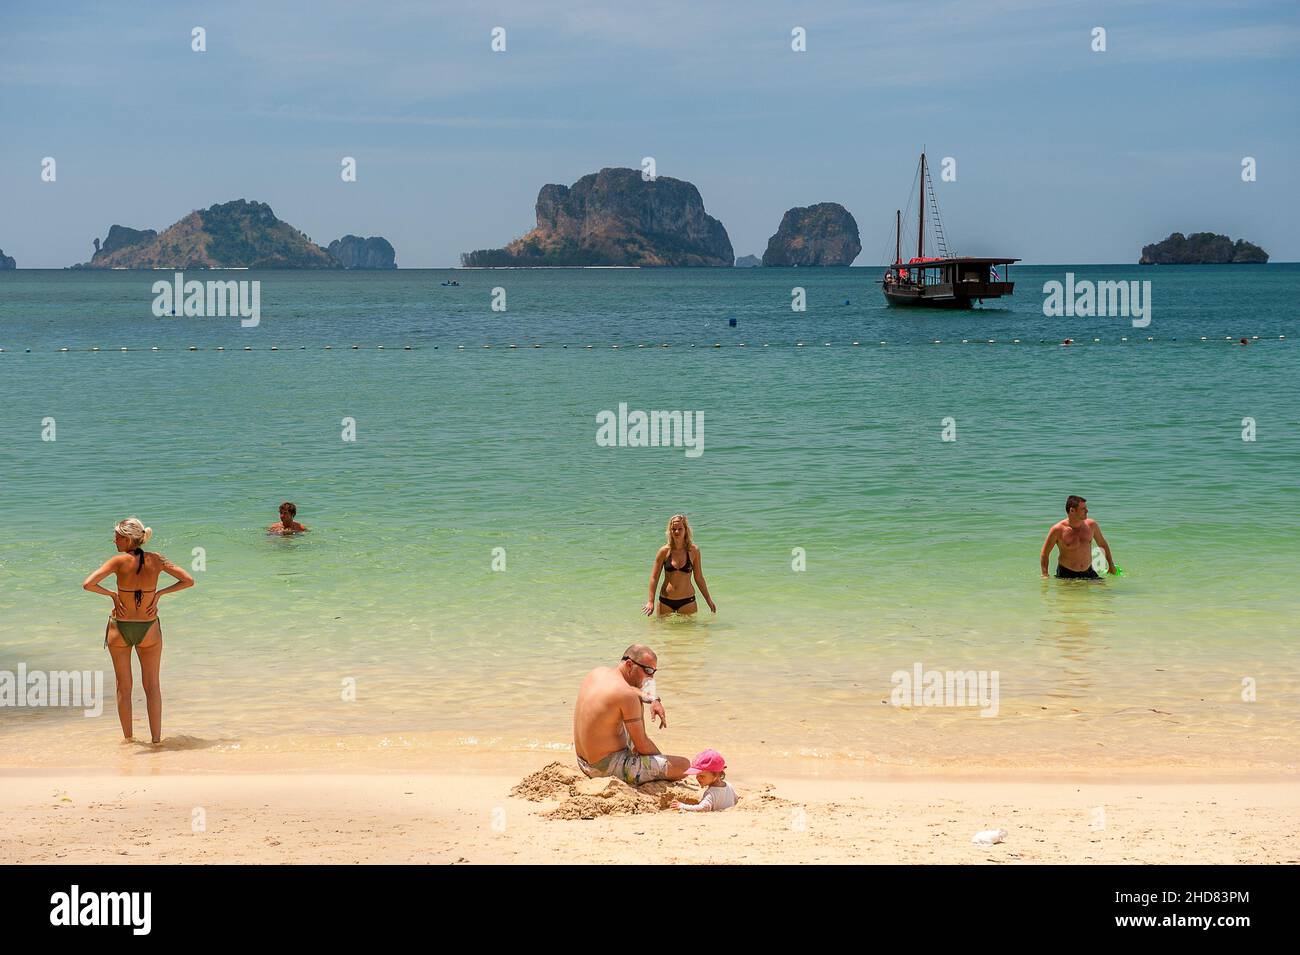 Prah Nang Beach on Railay Beach peninsula is one of the most beautiful beaches in Thailand. Stock Photo